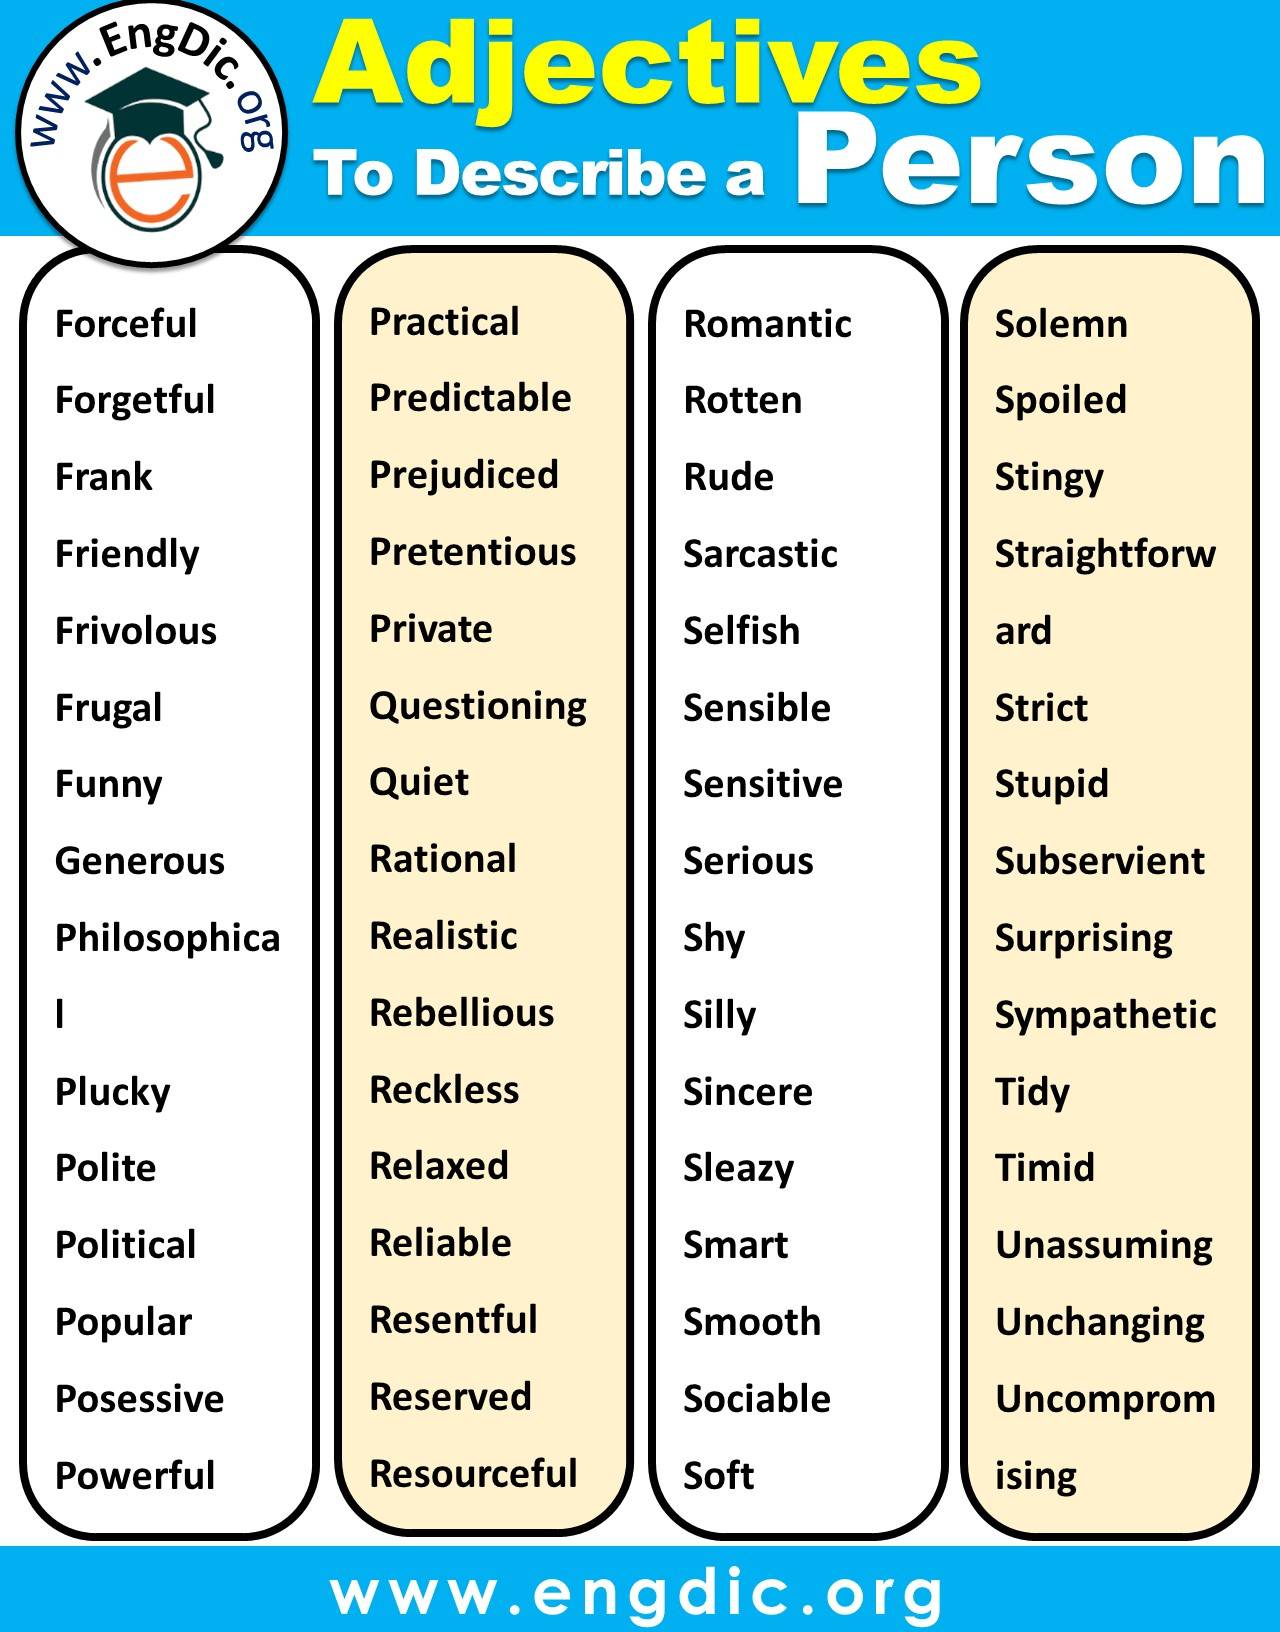 list of adjectives to describe a person positively